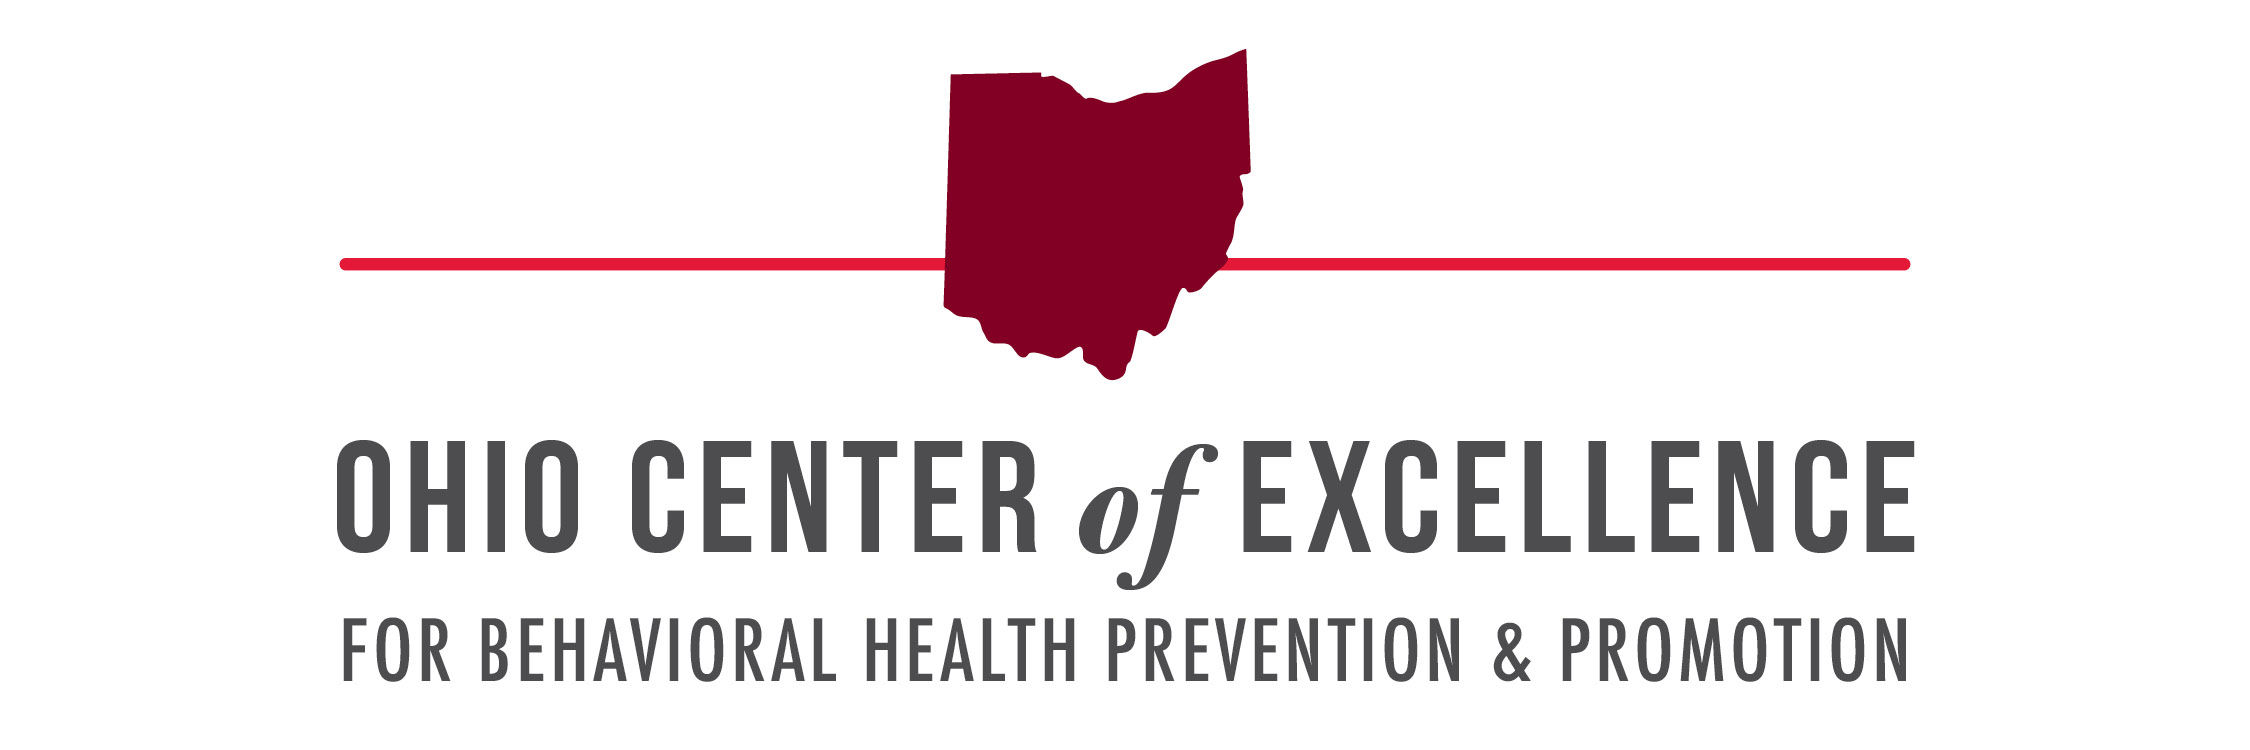 Ohio Center of Excellence for Behavioral Health Prevention & Promotion